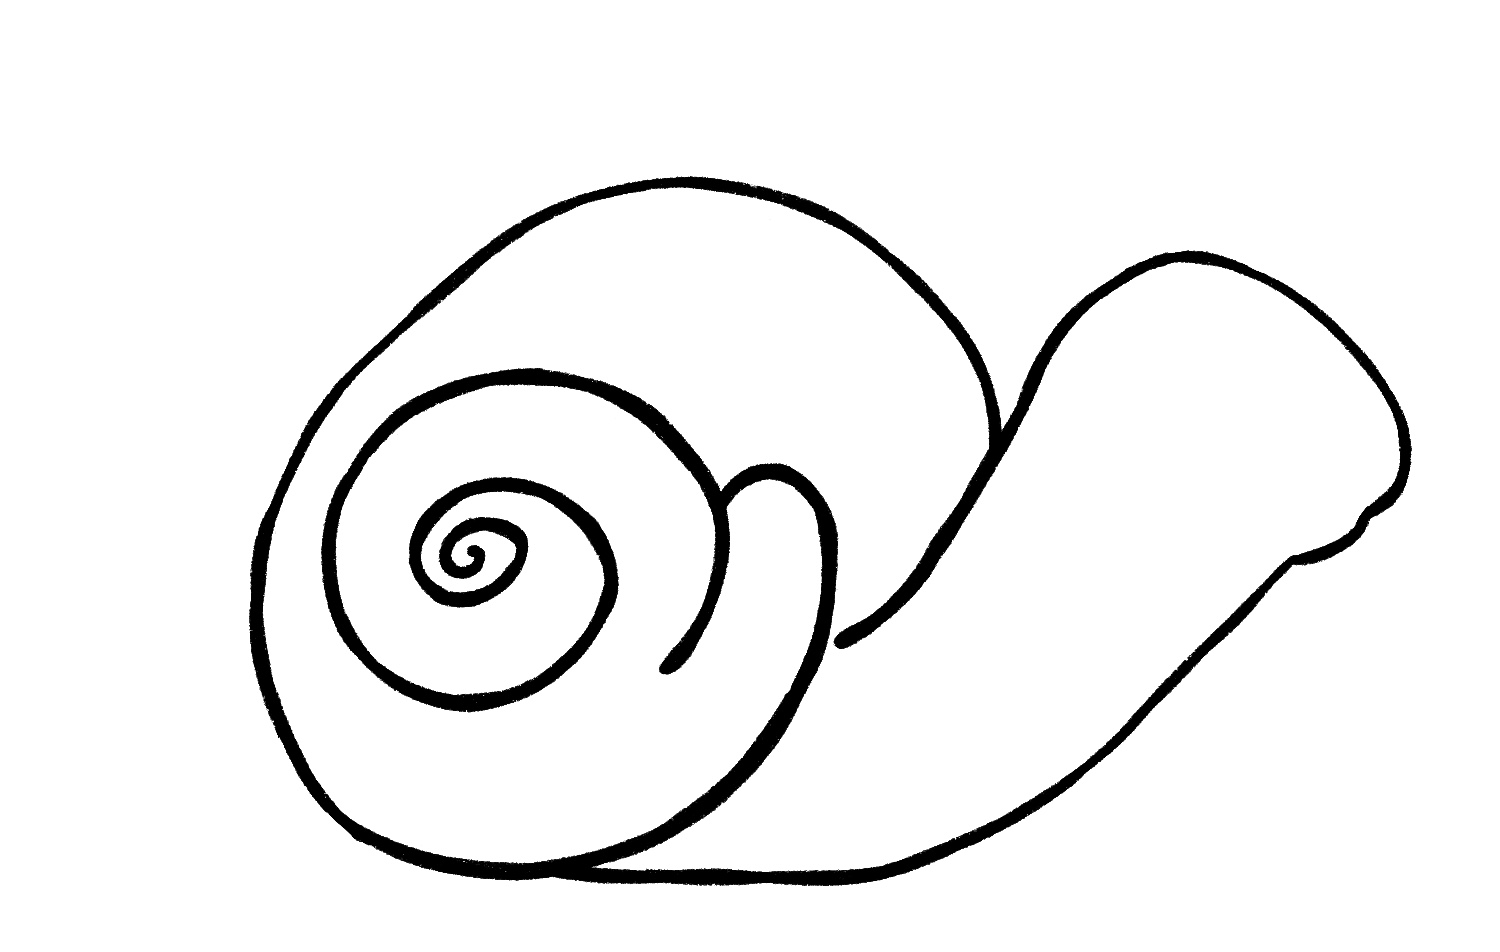 Rough sketch of the shell